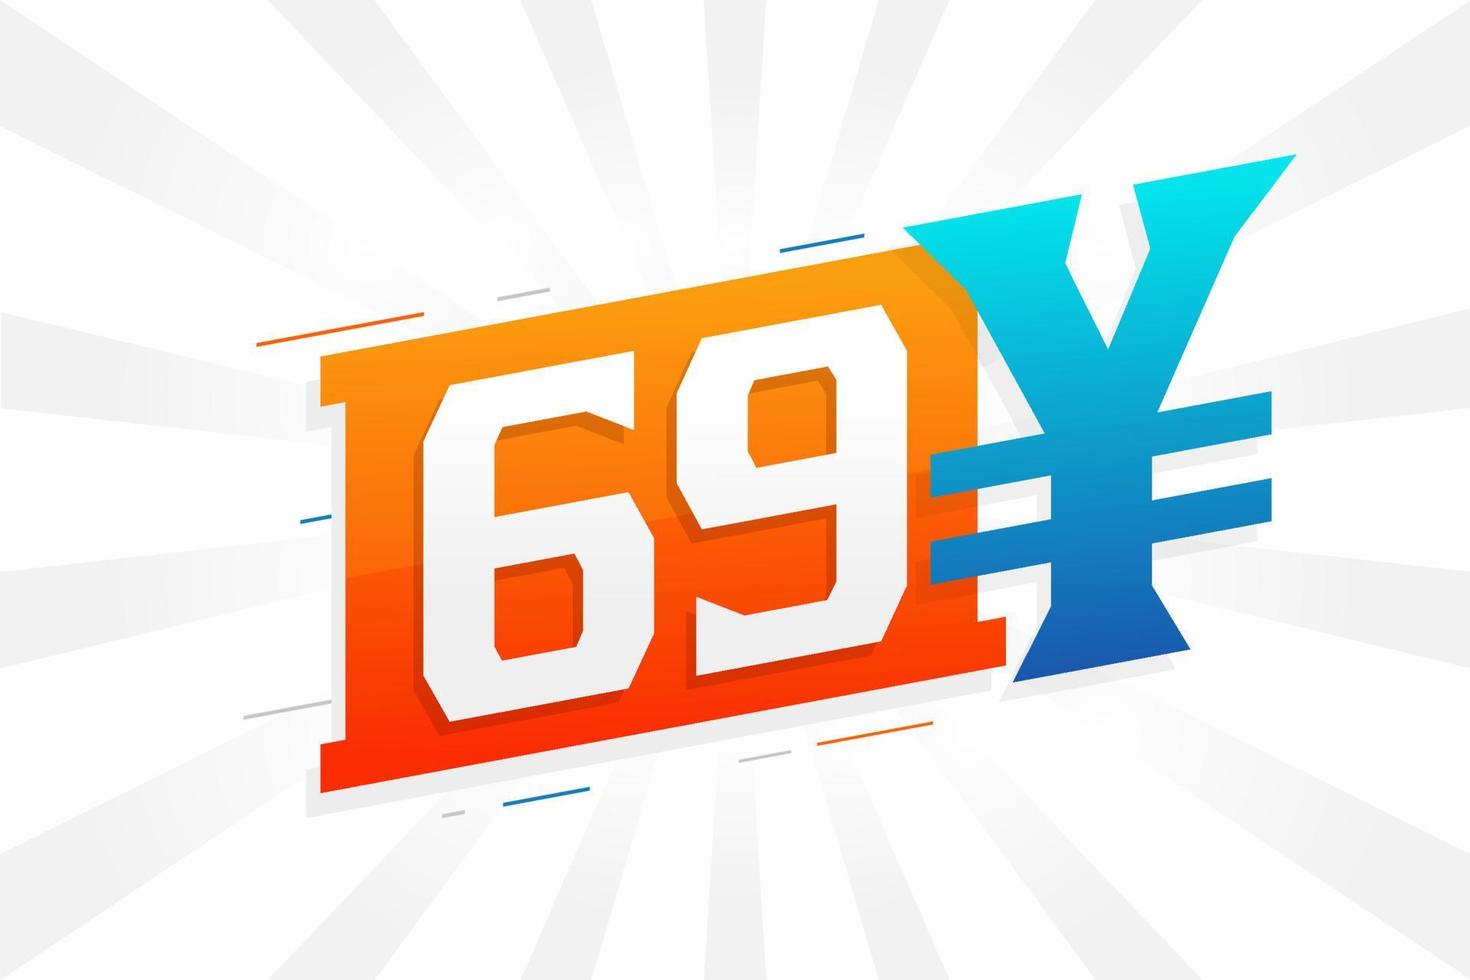 69 Yuan Chinese currency vector text symbol. 69 Yen Japanese currency Money stock vector